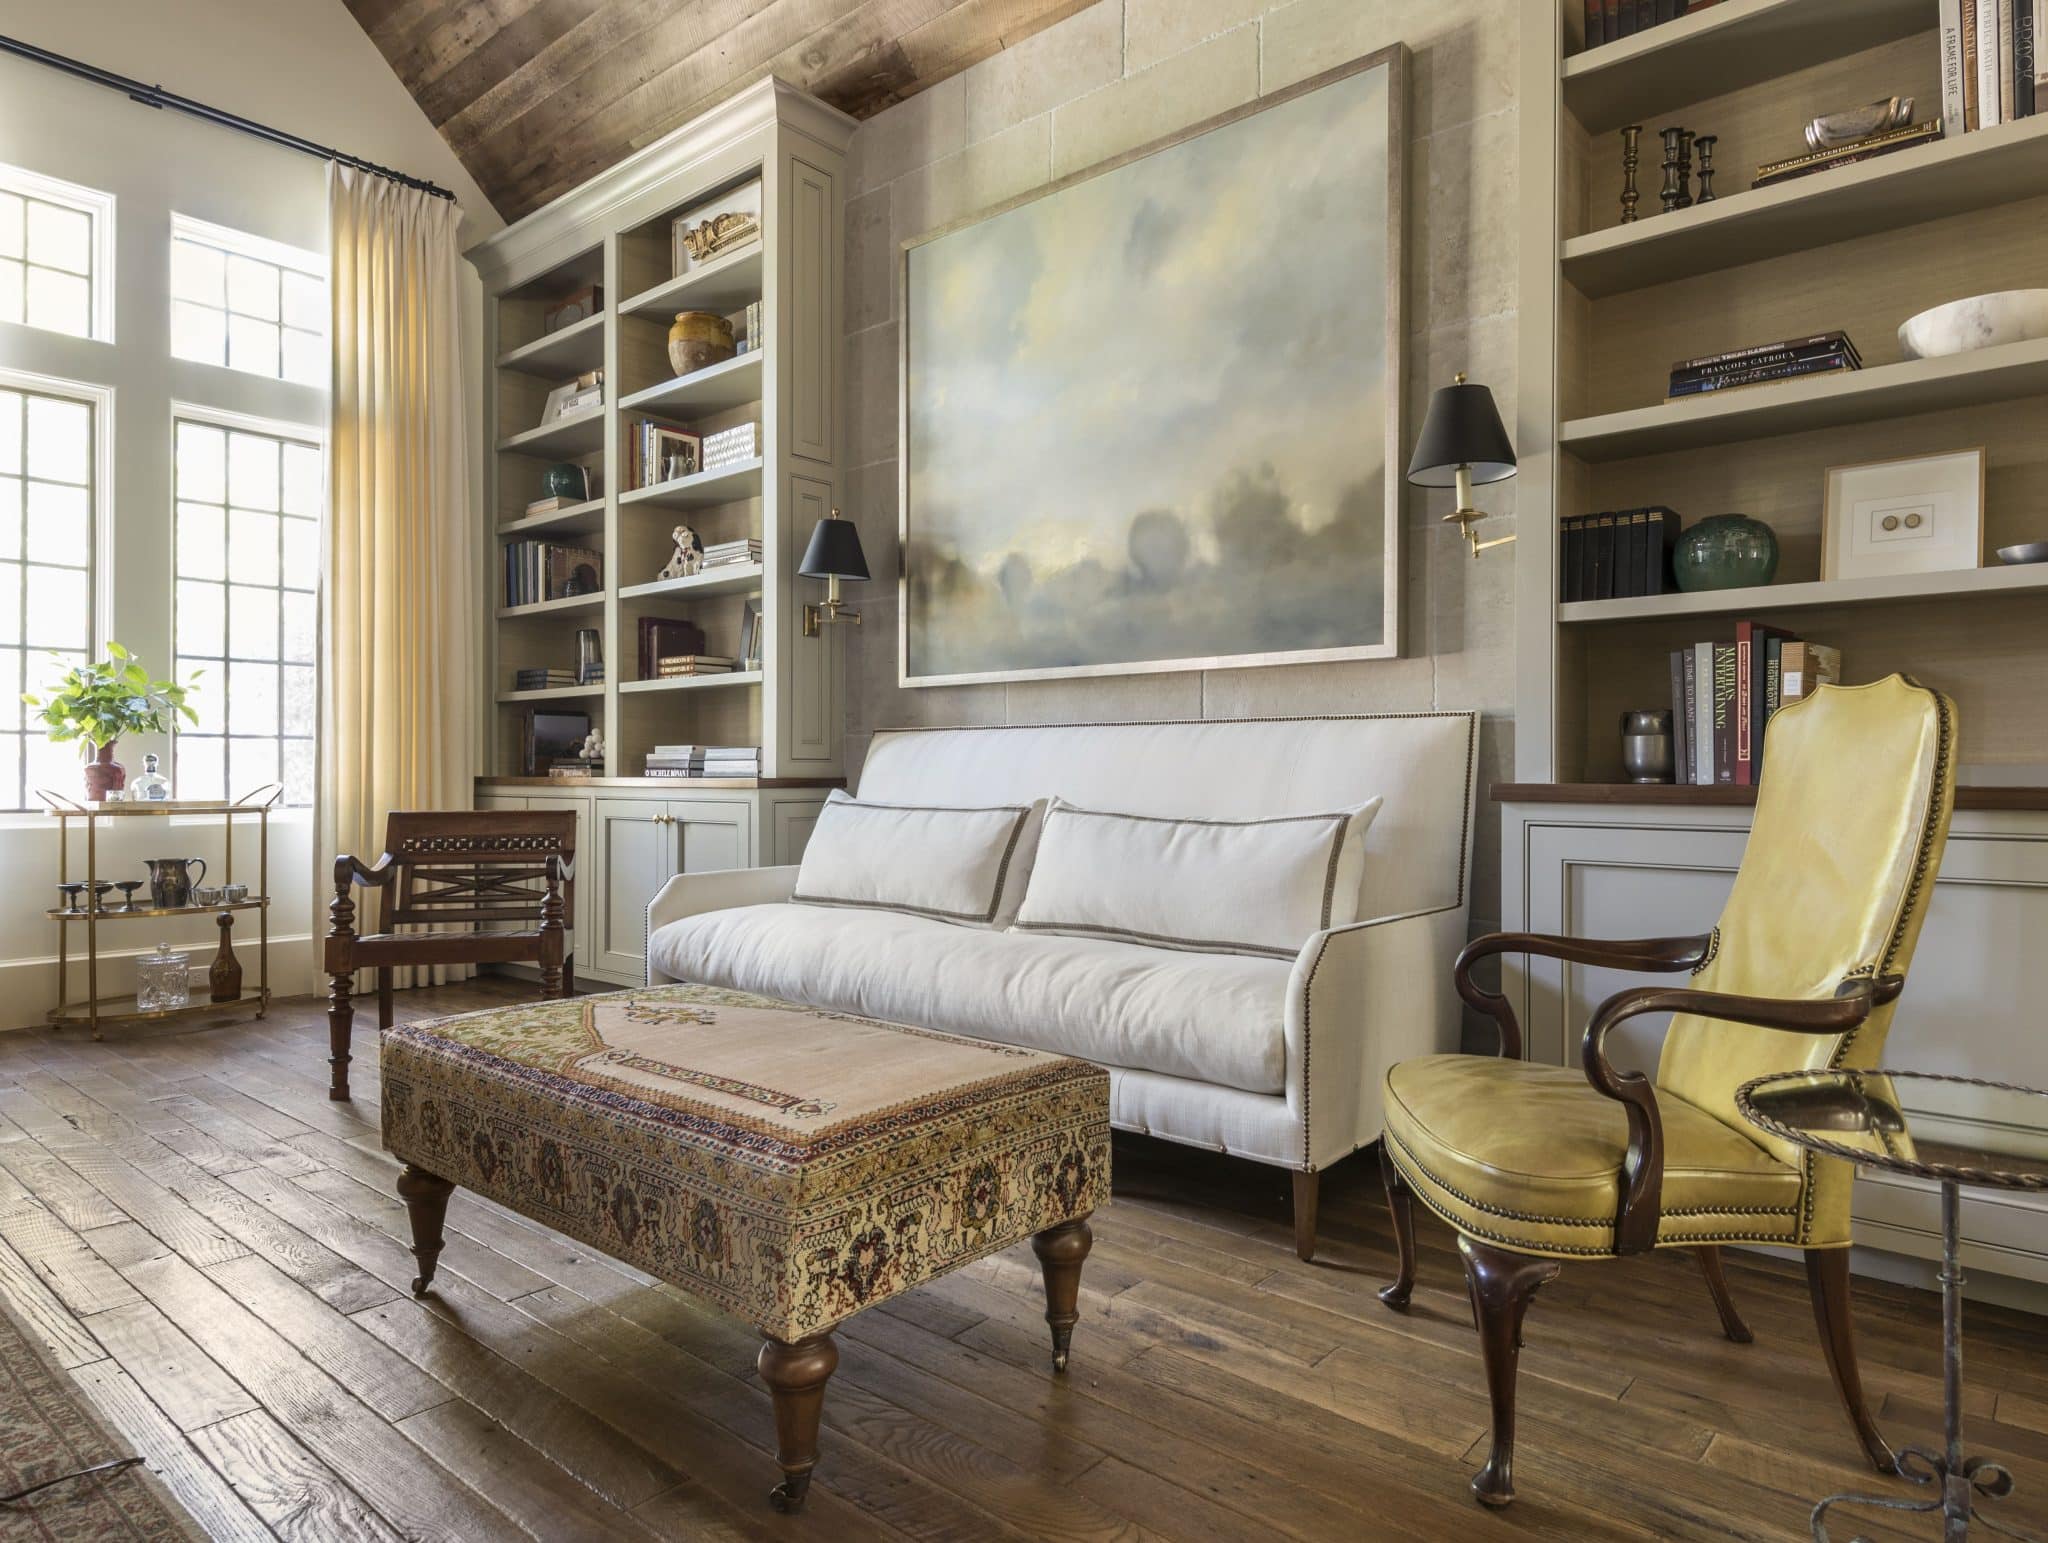  Can French Country Sofas Be Used in Non-Living Room Spaces?